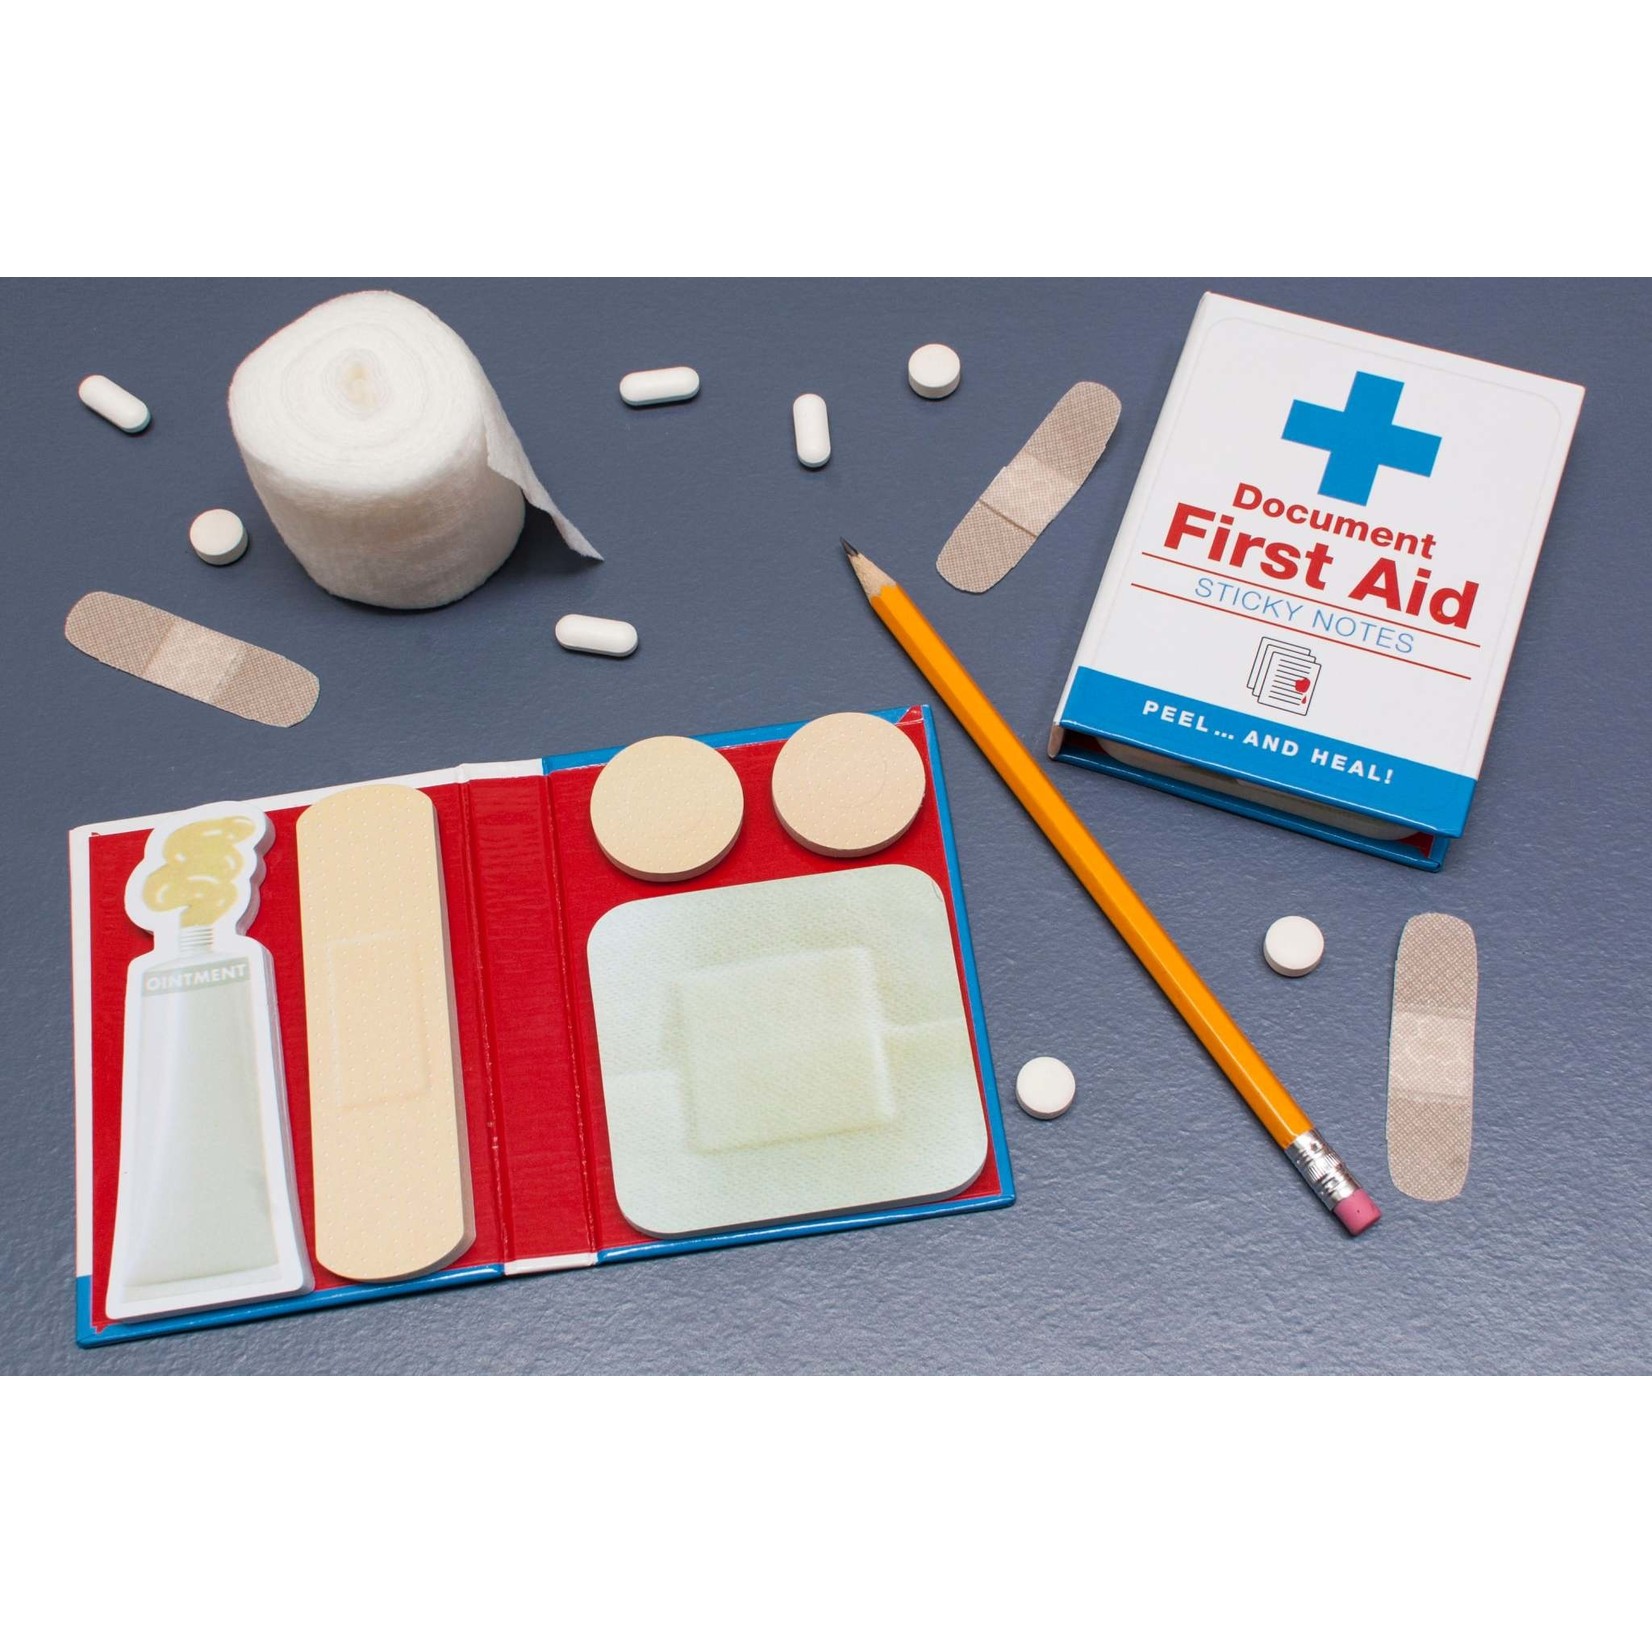 First Aid Sticky Notes